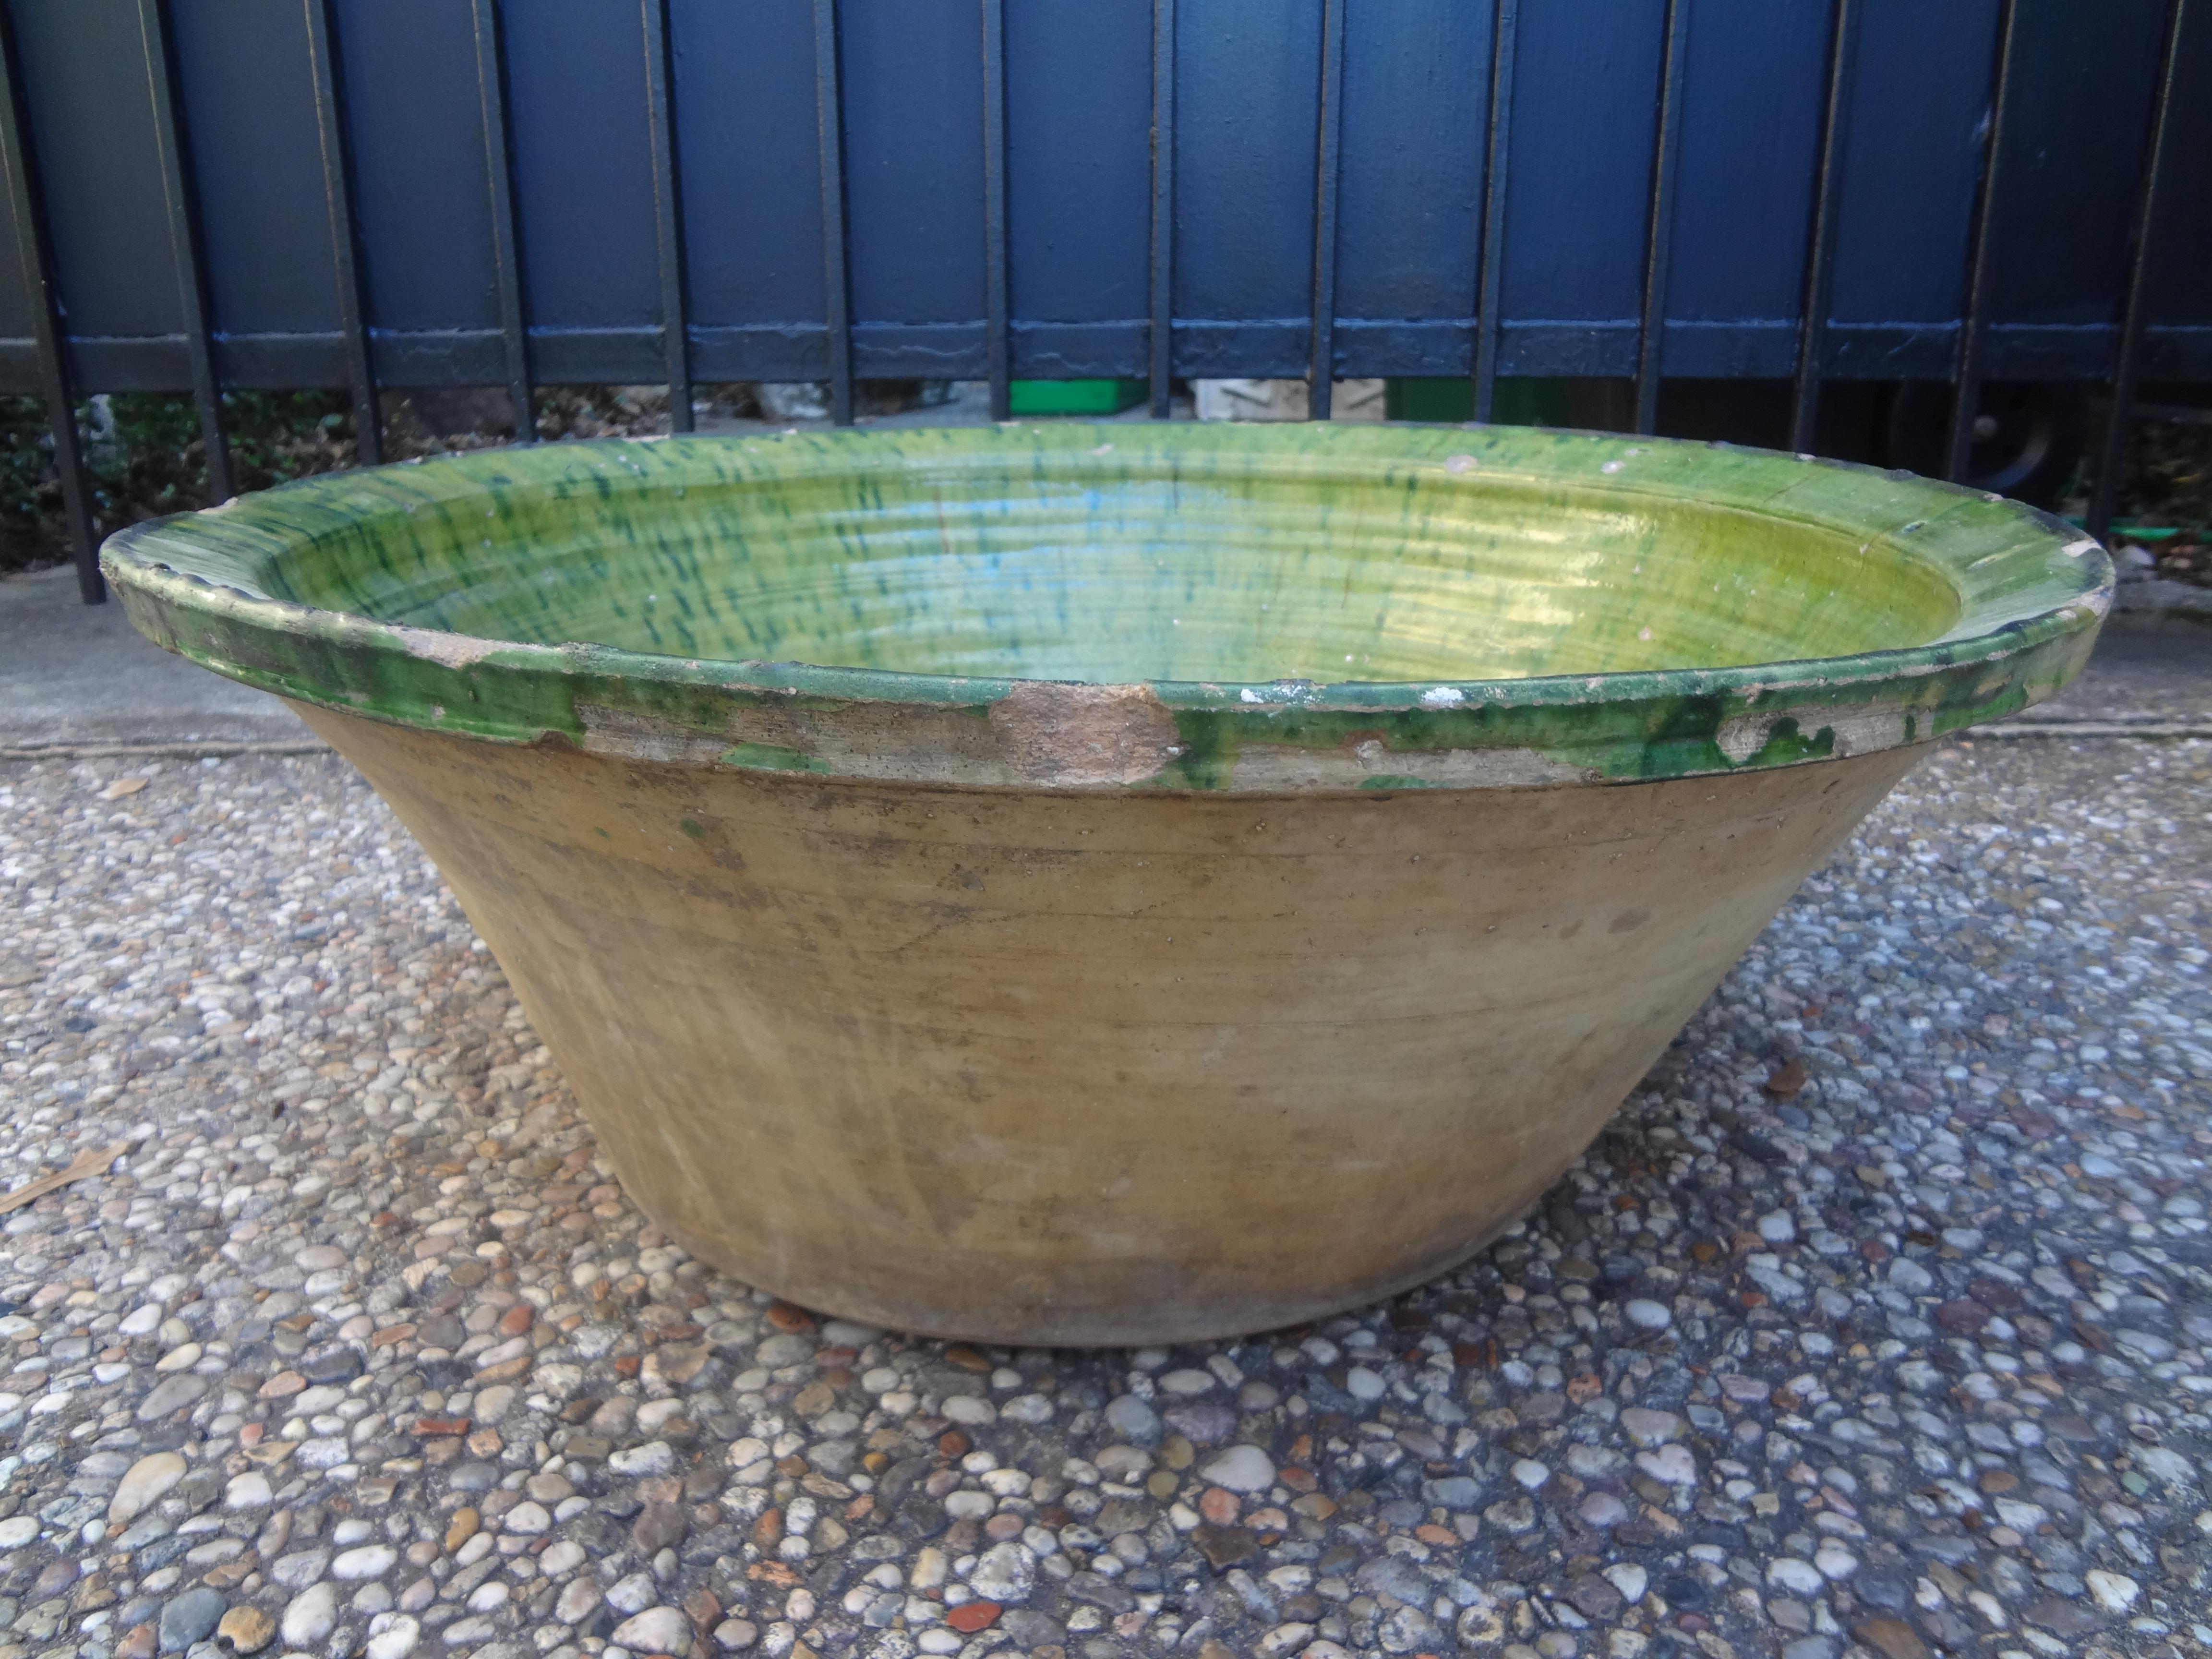 Large late 18th early 19th century rustic French pancheon or dough bowl. This antique French dough bowl has a beautiful green glazed interior and an unglazed terra cotta exterior.
French pancheons were versatile terracotta bowls for kitchen use